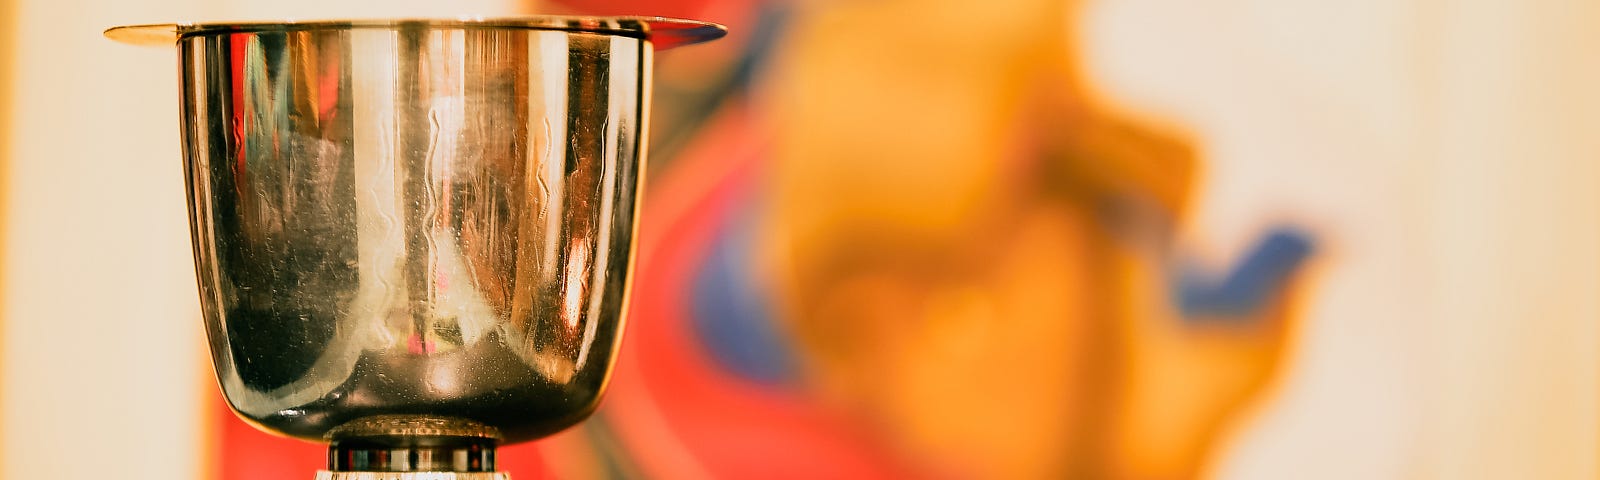 Beautiful gold chalice in the left foreground, with a vibrant orange, gold and blue abstract image in the soft-focus background.